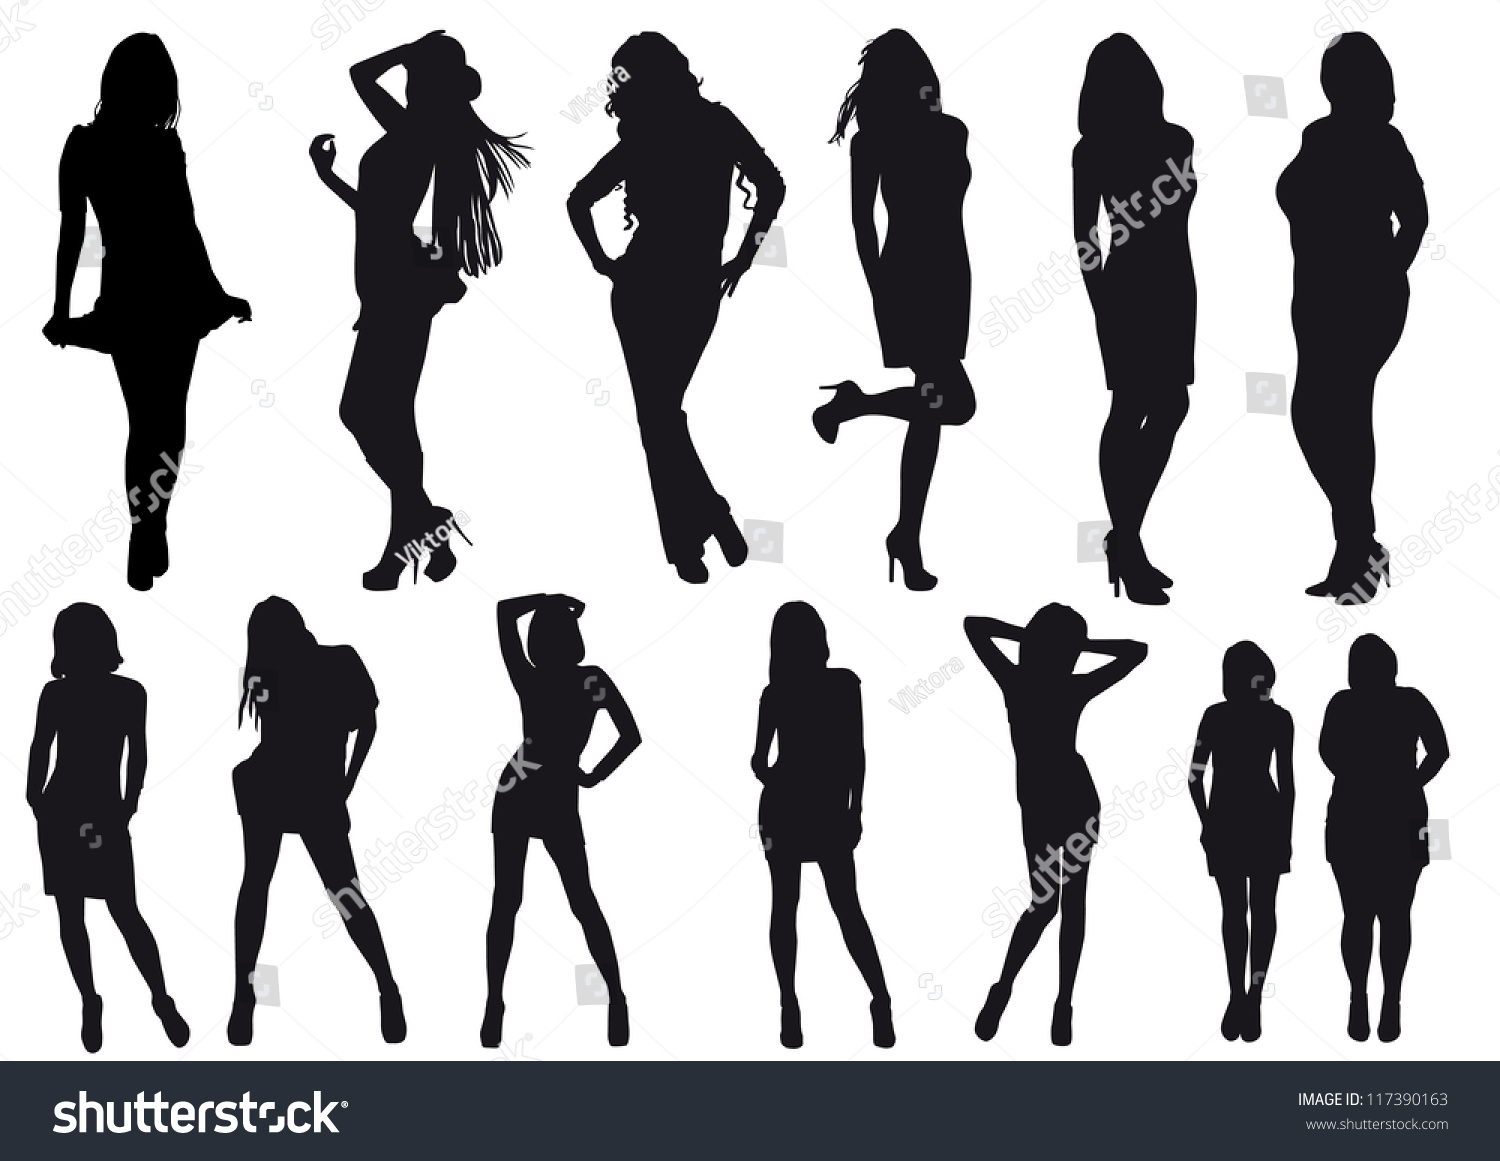 Vector Silhouettes Drawing Girl - 117390163 : Shutterstock